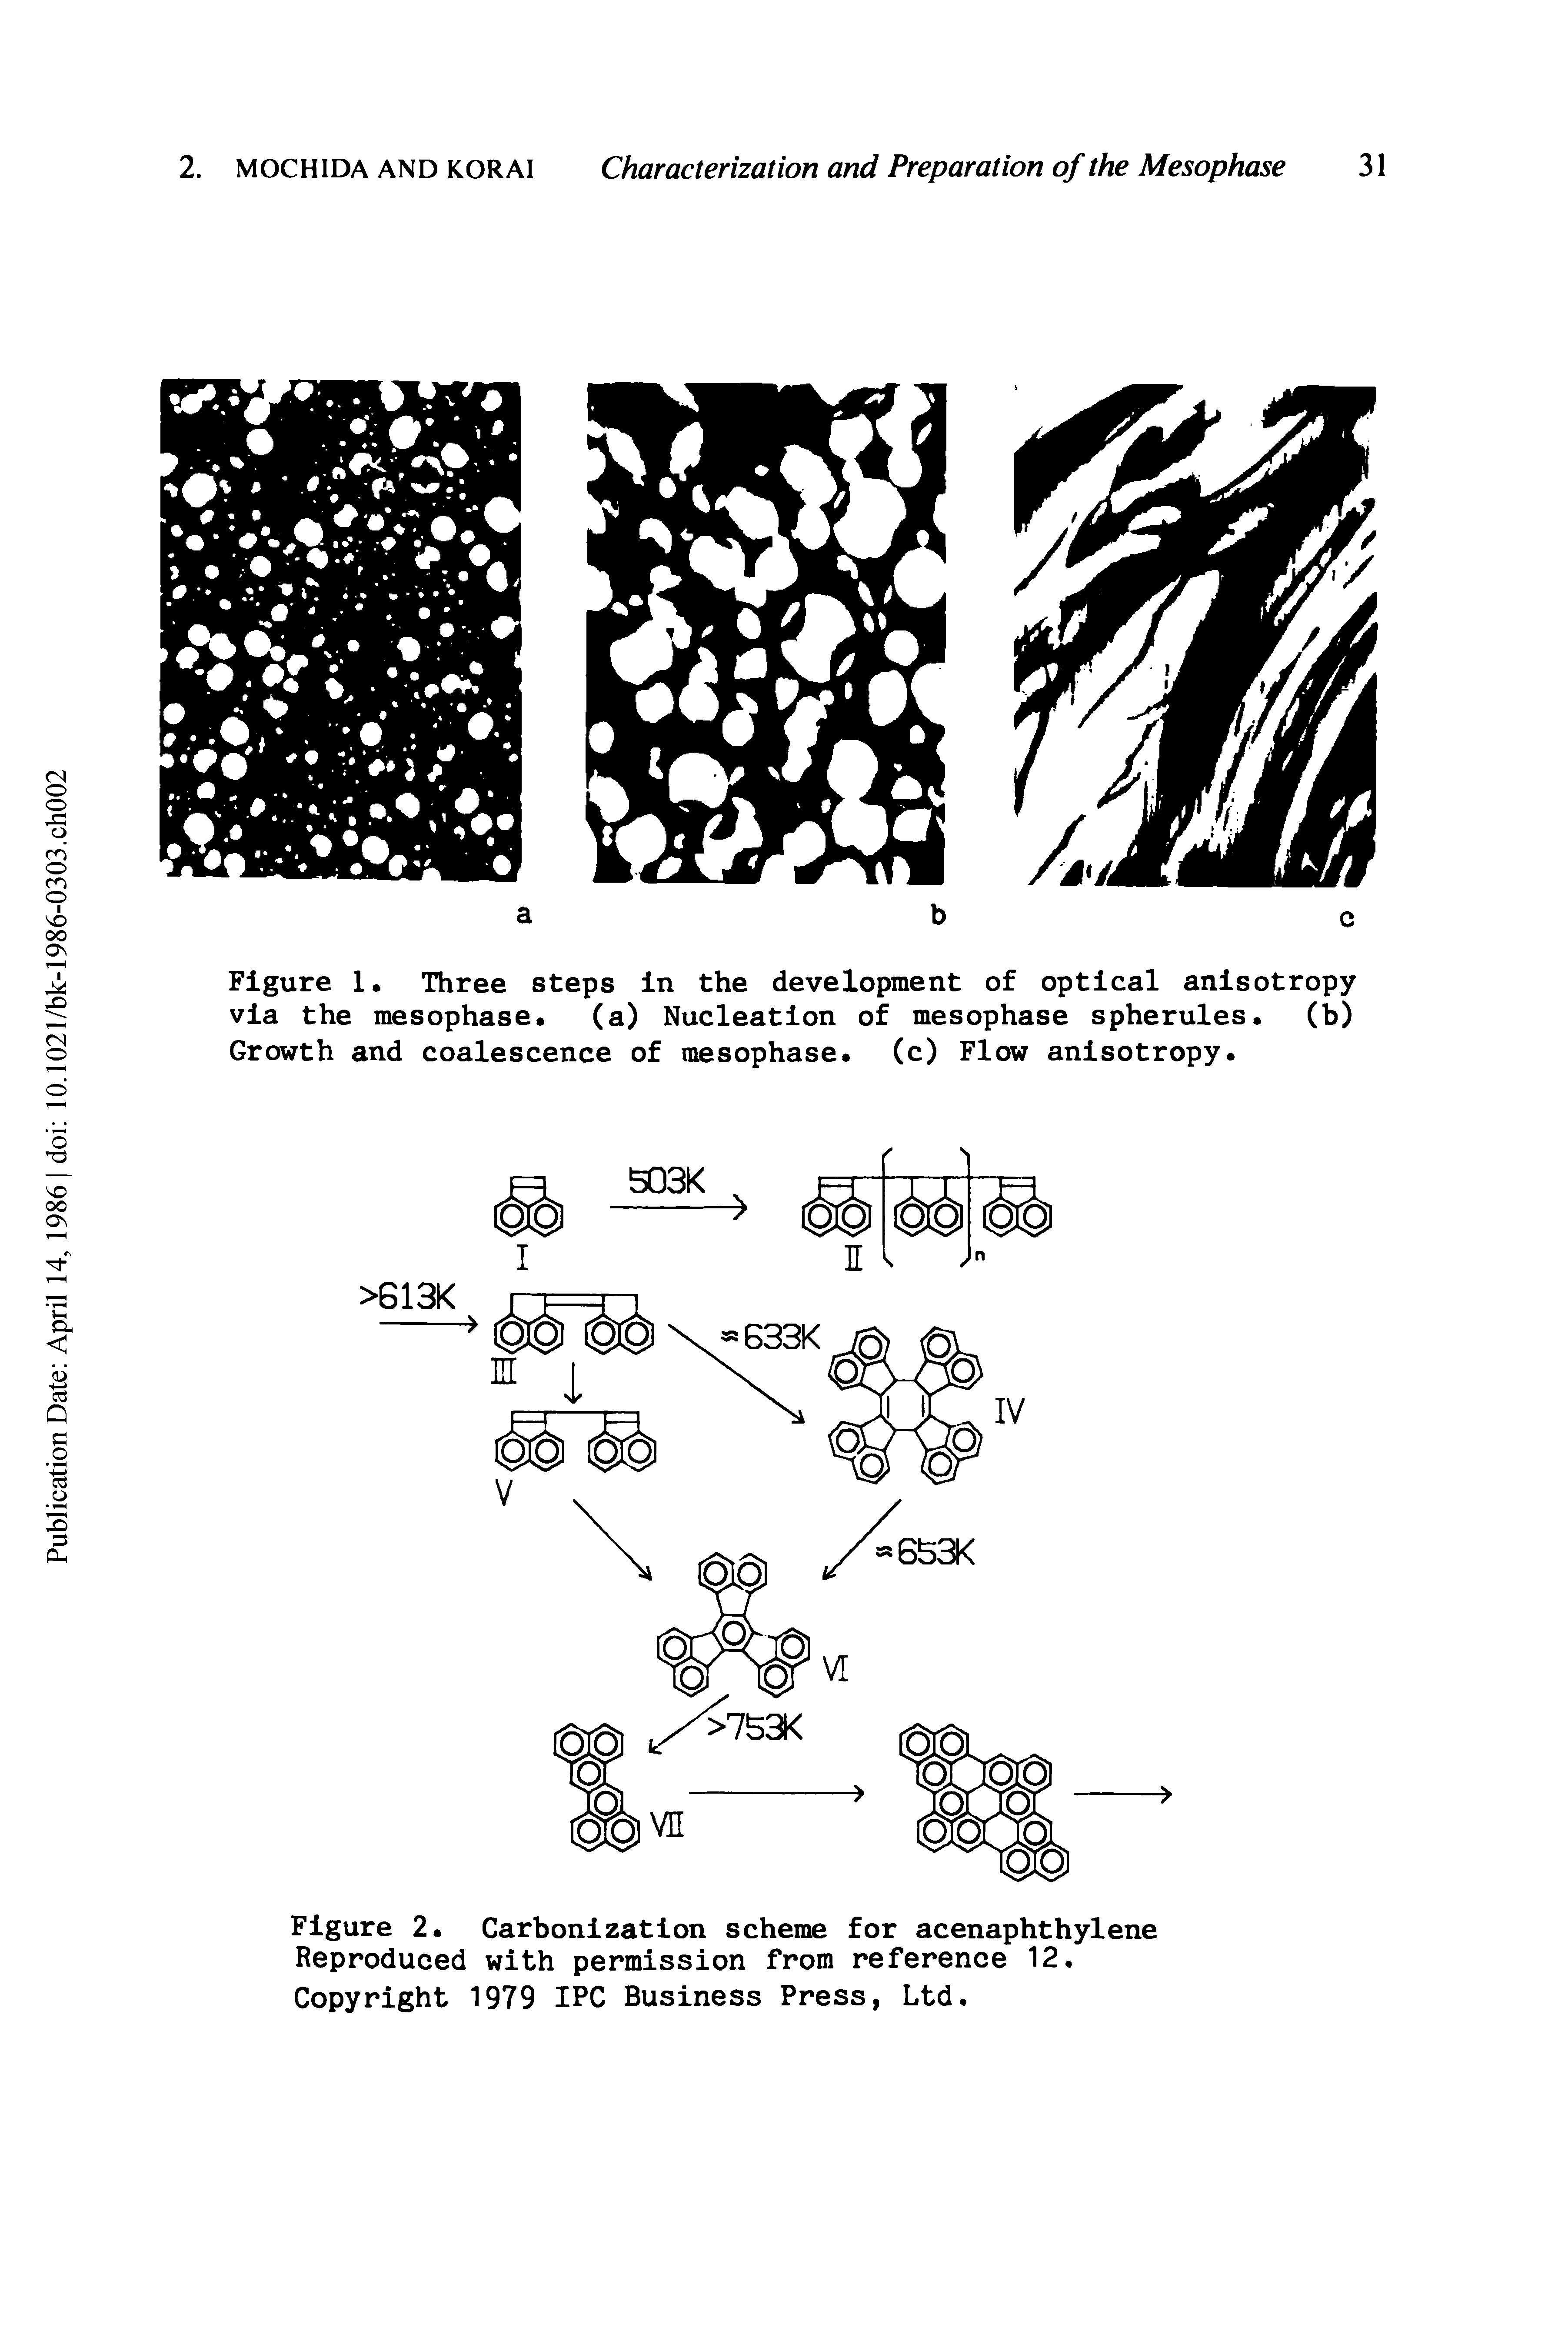 Figure 2. Carbonization scheme for acenaphthylene Reproduced with permission from reference 12. Copyright 1979 IPC Business Press, Ltd.